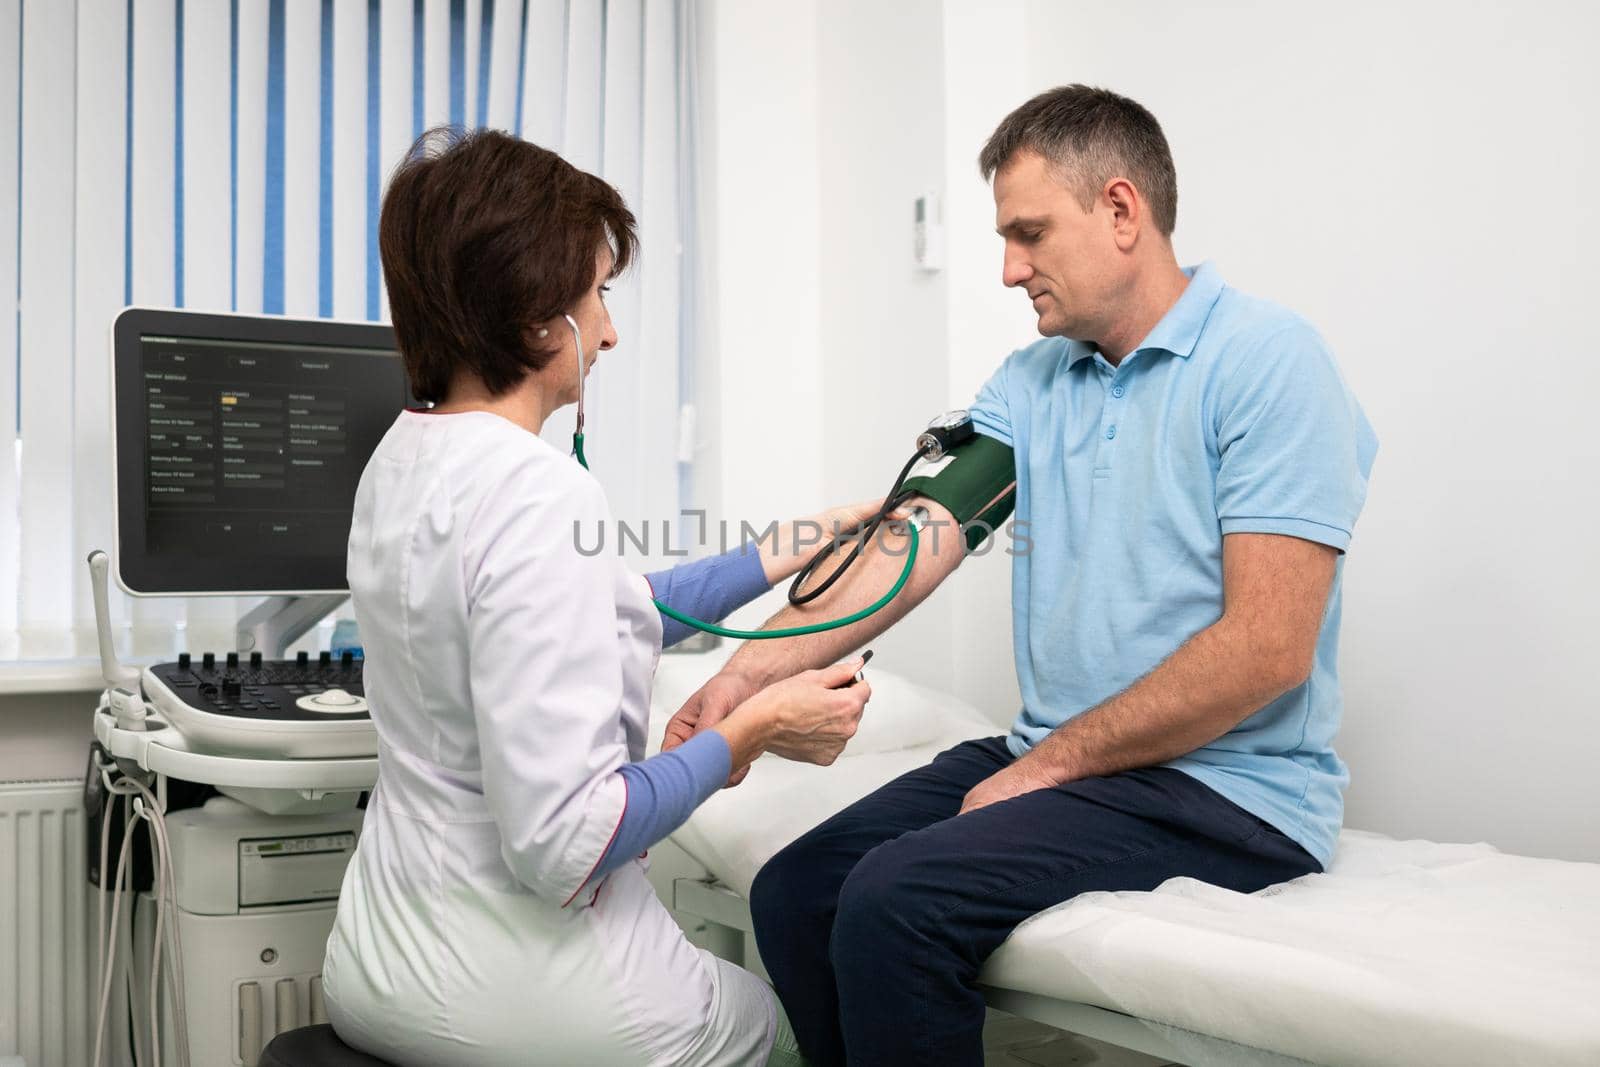 Female doctor measures blood pressure with a sphygmomanometer to male patient at medical examination in clinic office. Cardiologist checks blood pressure of male patient at cardiology hospital.